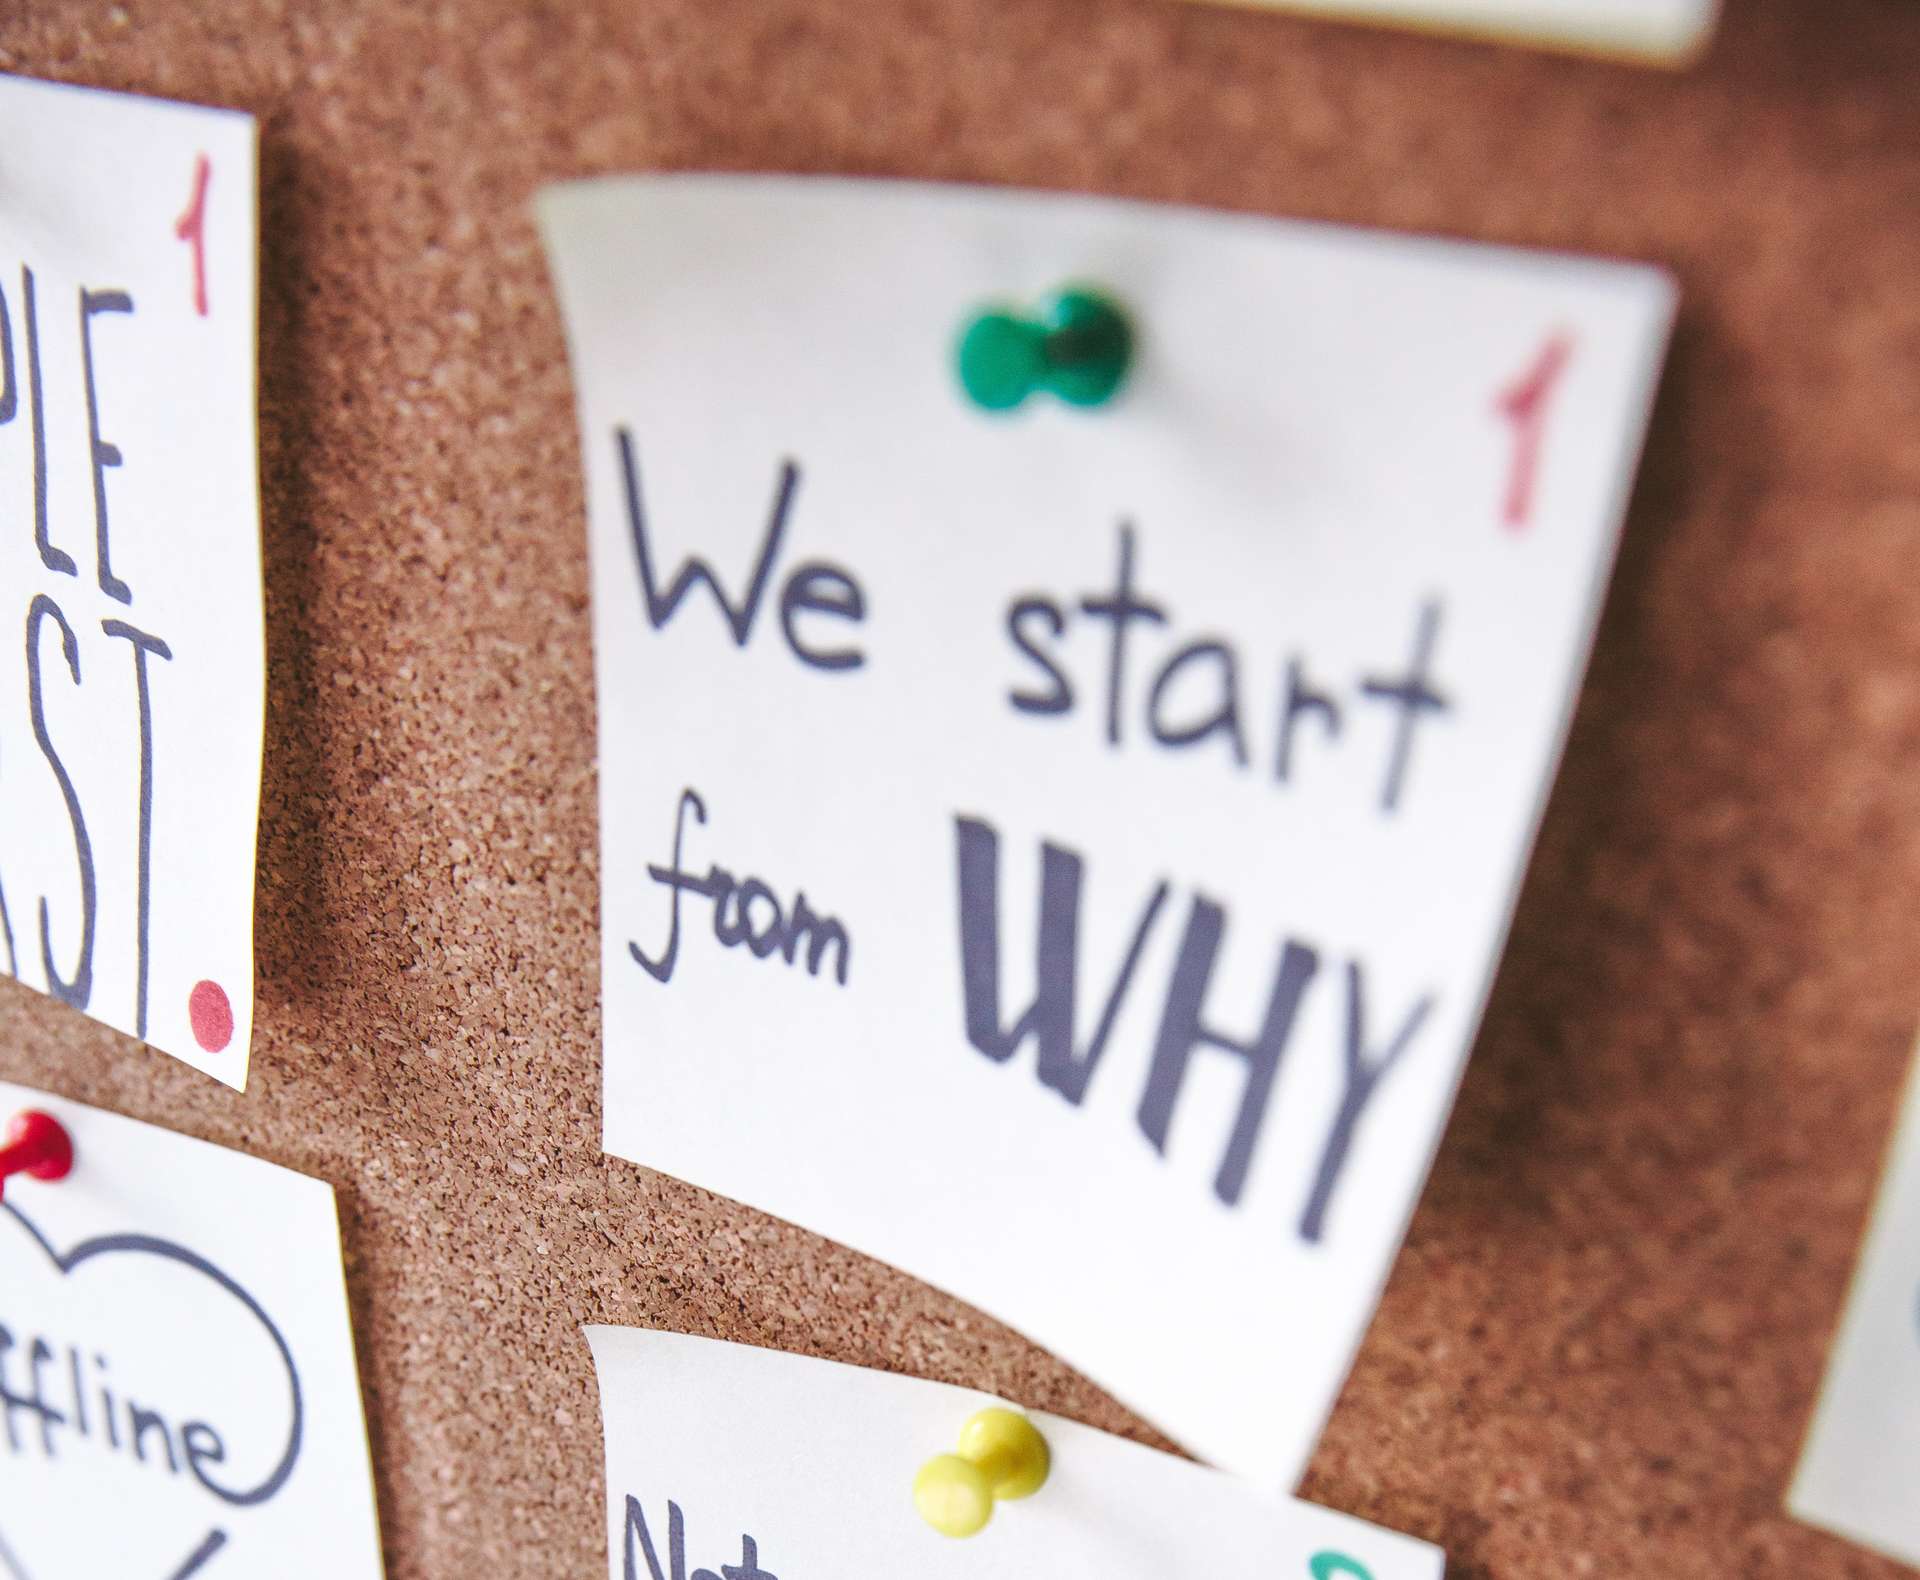 postit note on a corkboard with we start from why written on it